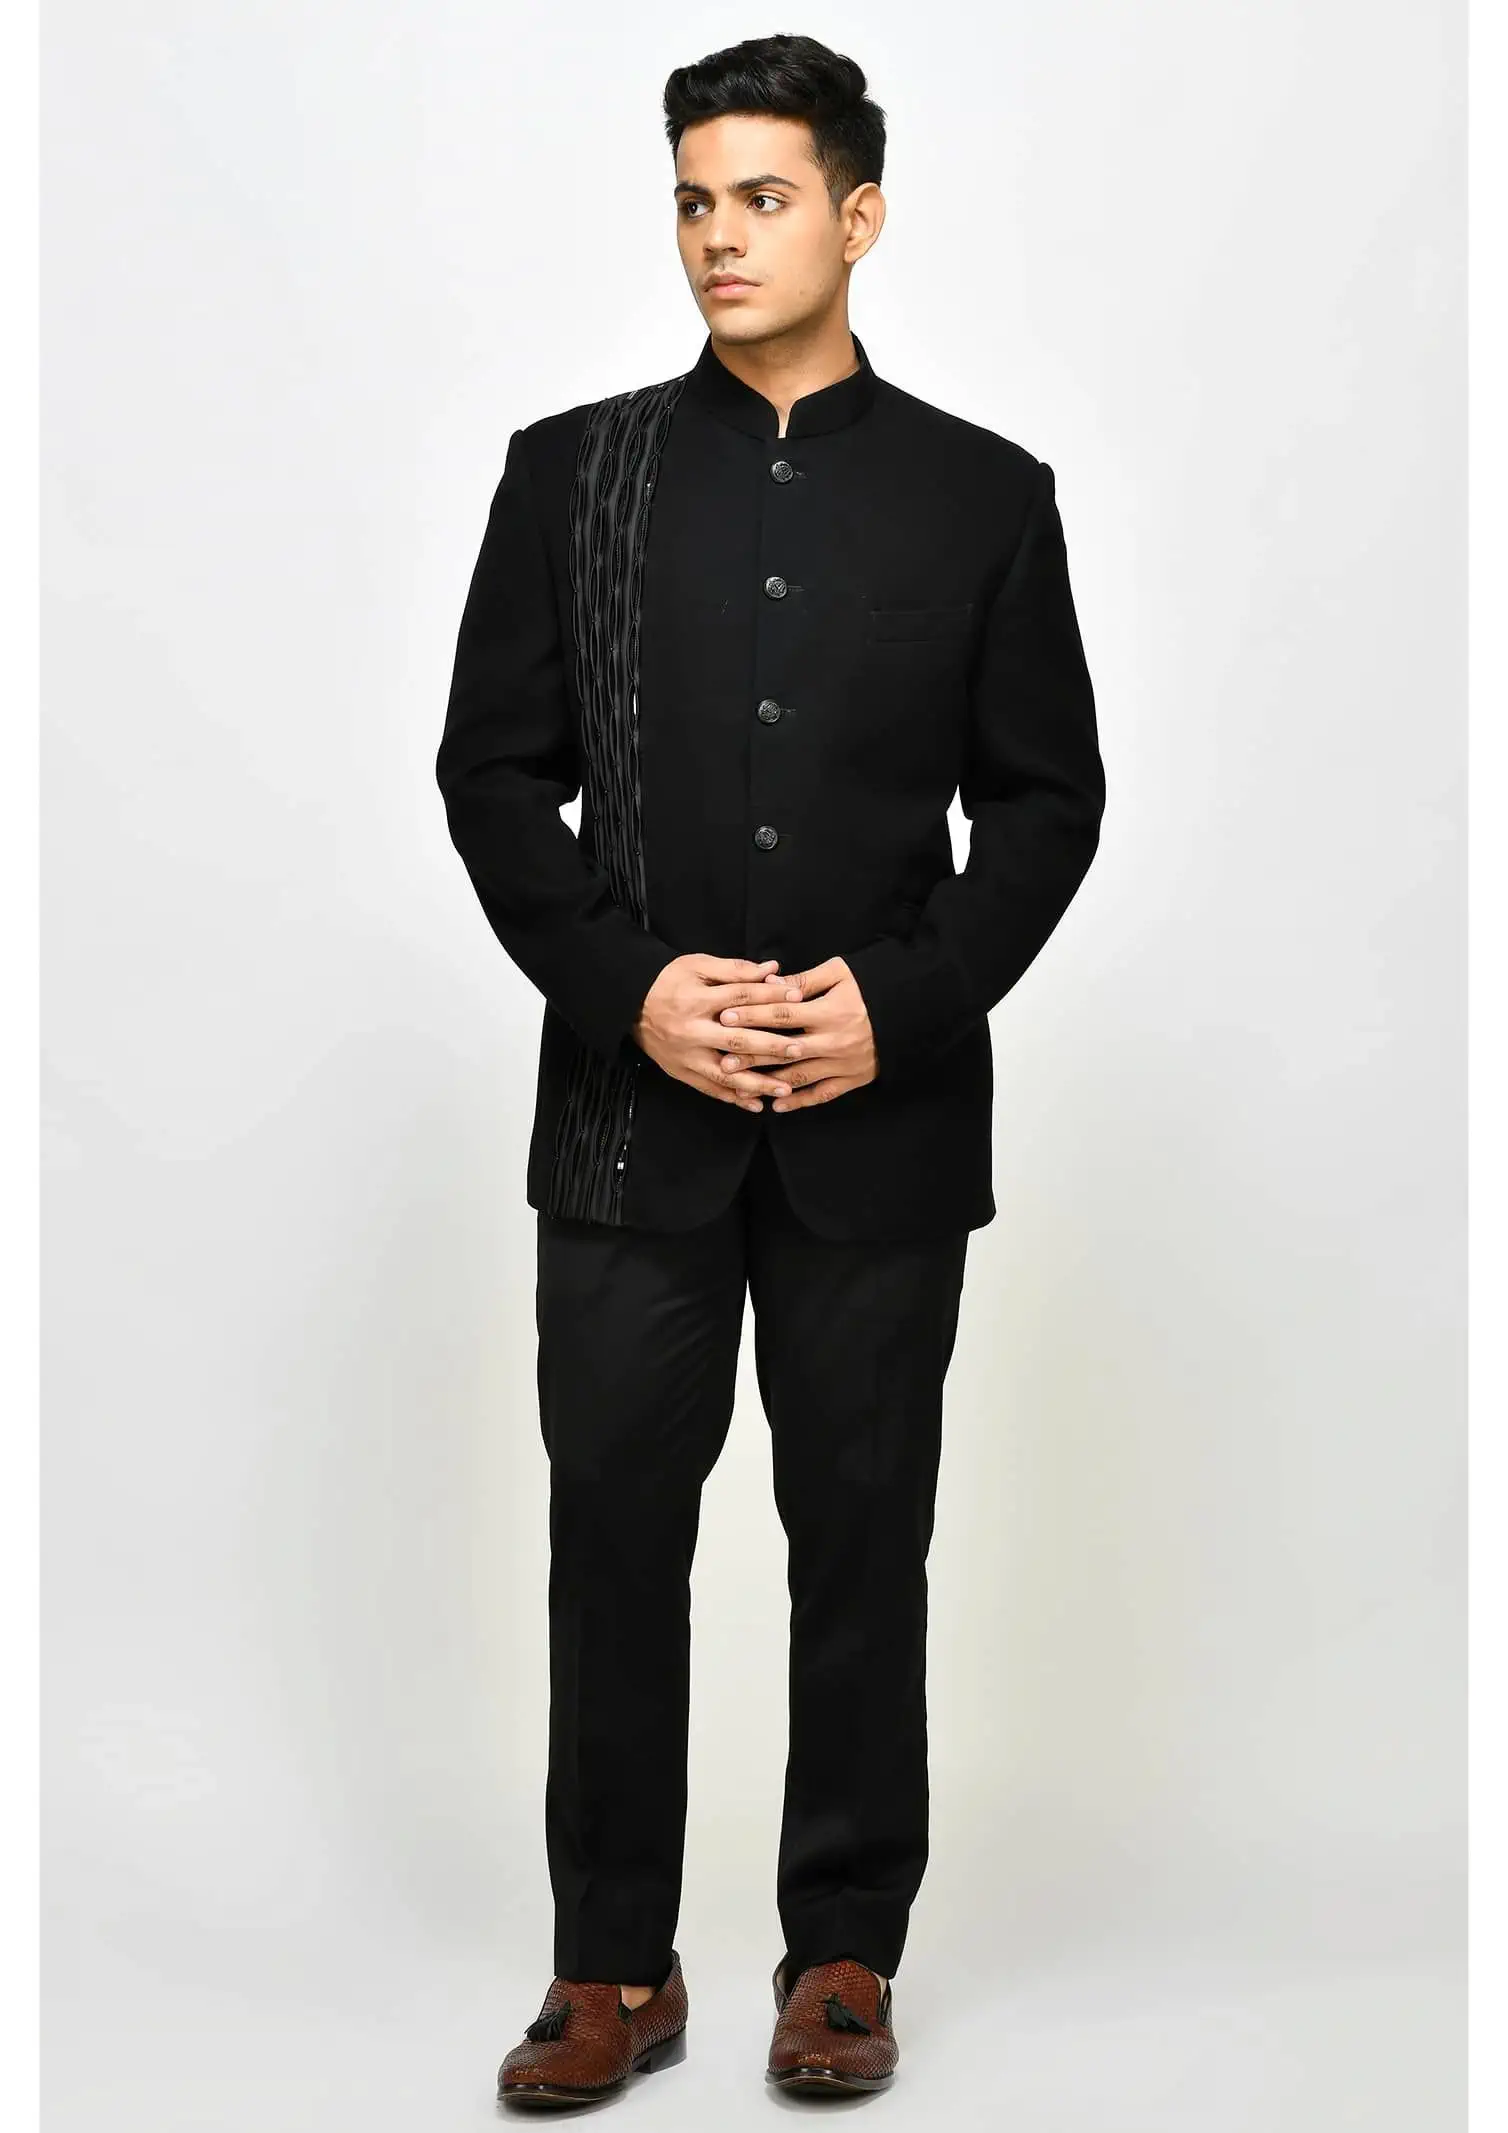 Black shirt and pants with red ties for groomsmen  Black dress shirt men  Groomsmen attire black Mens shirt dress